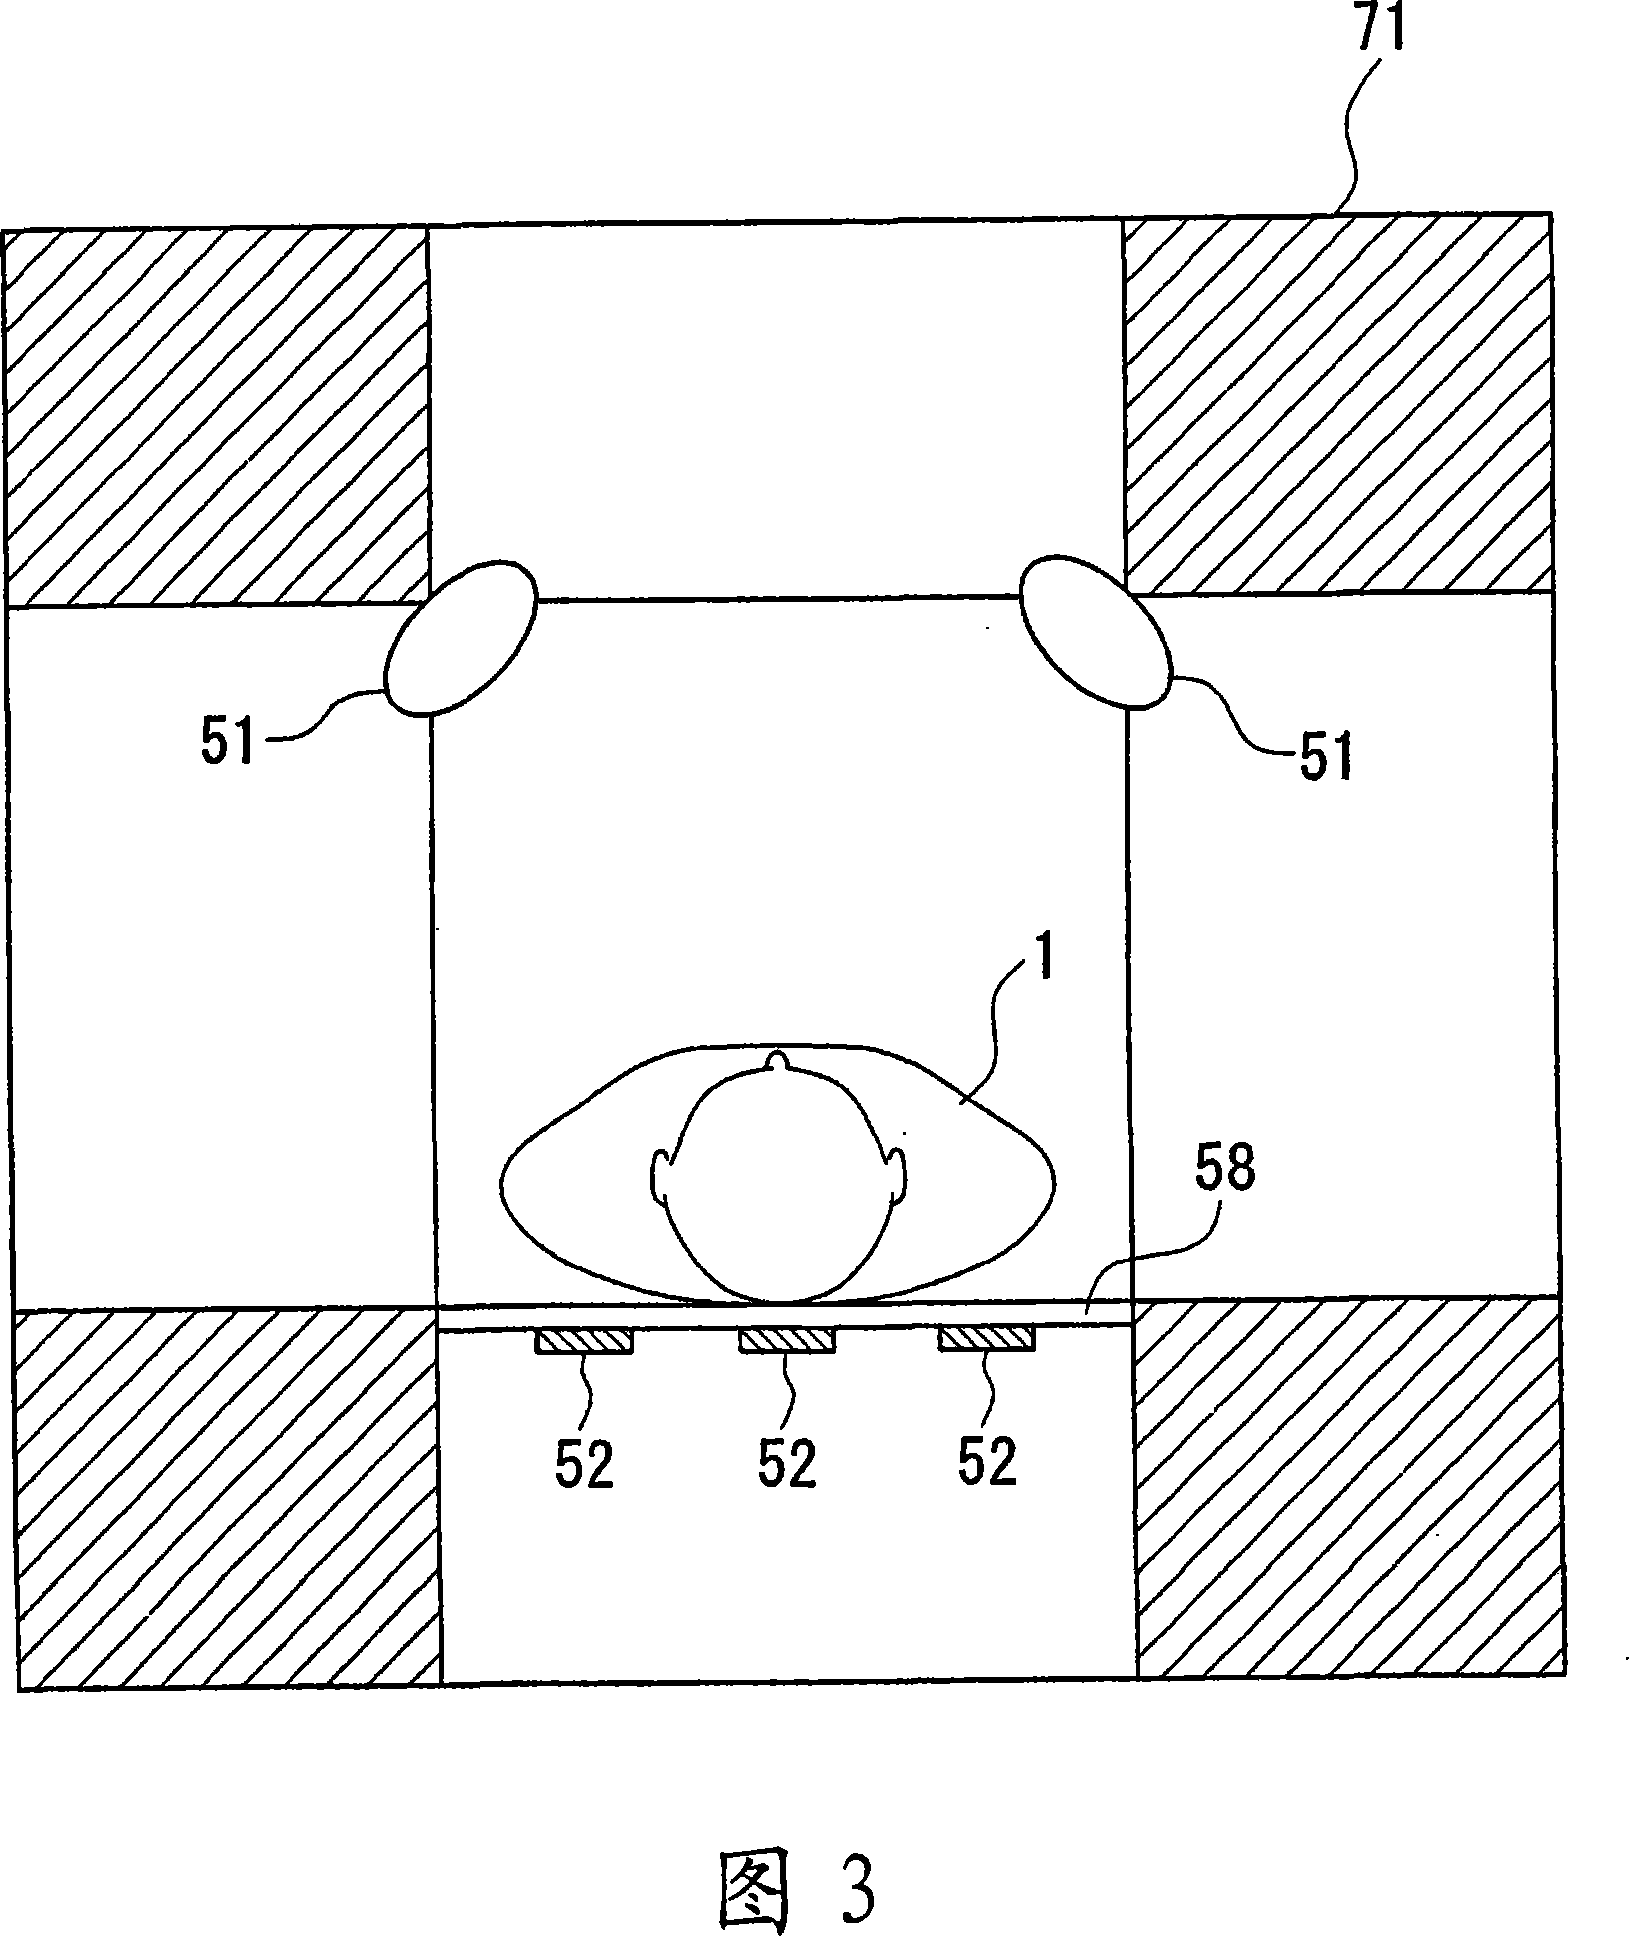 Position detection system, guidance system, position detection method, medical device, and medical magnetic-induction and position-detection system